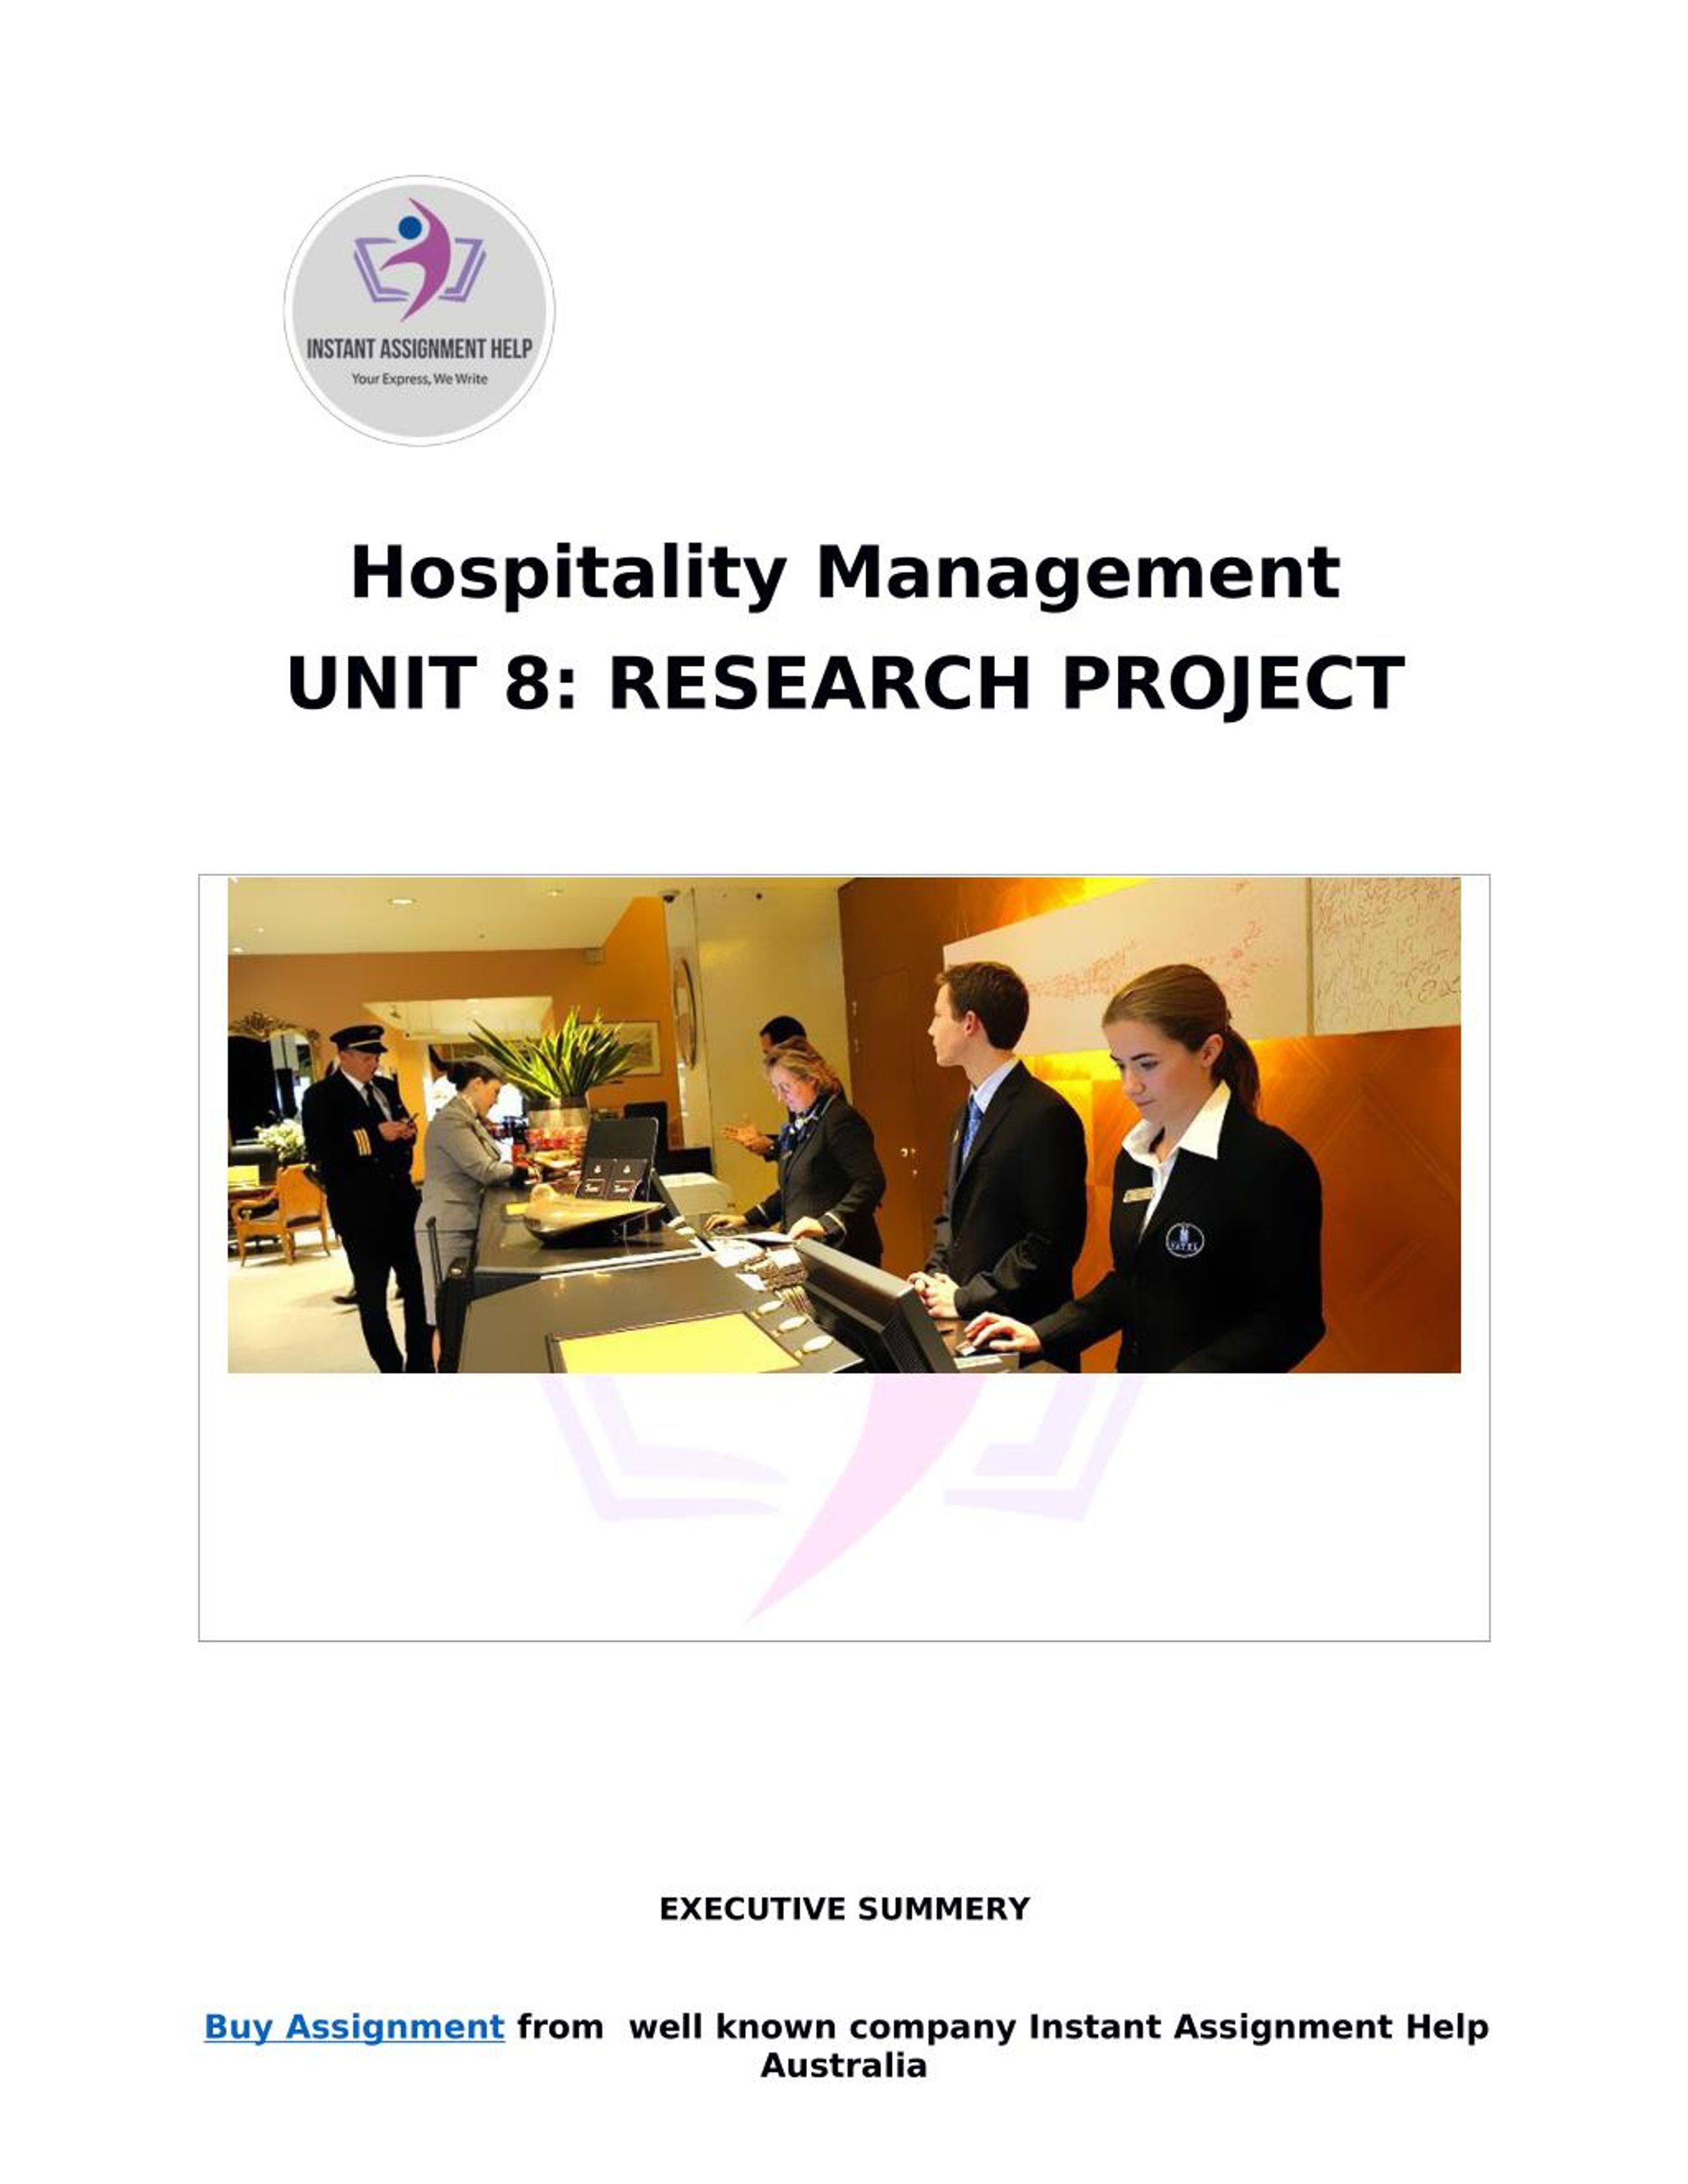 research projects in hospitality management